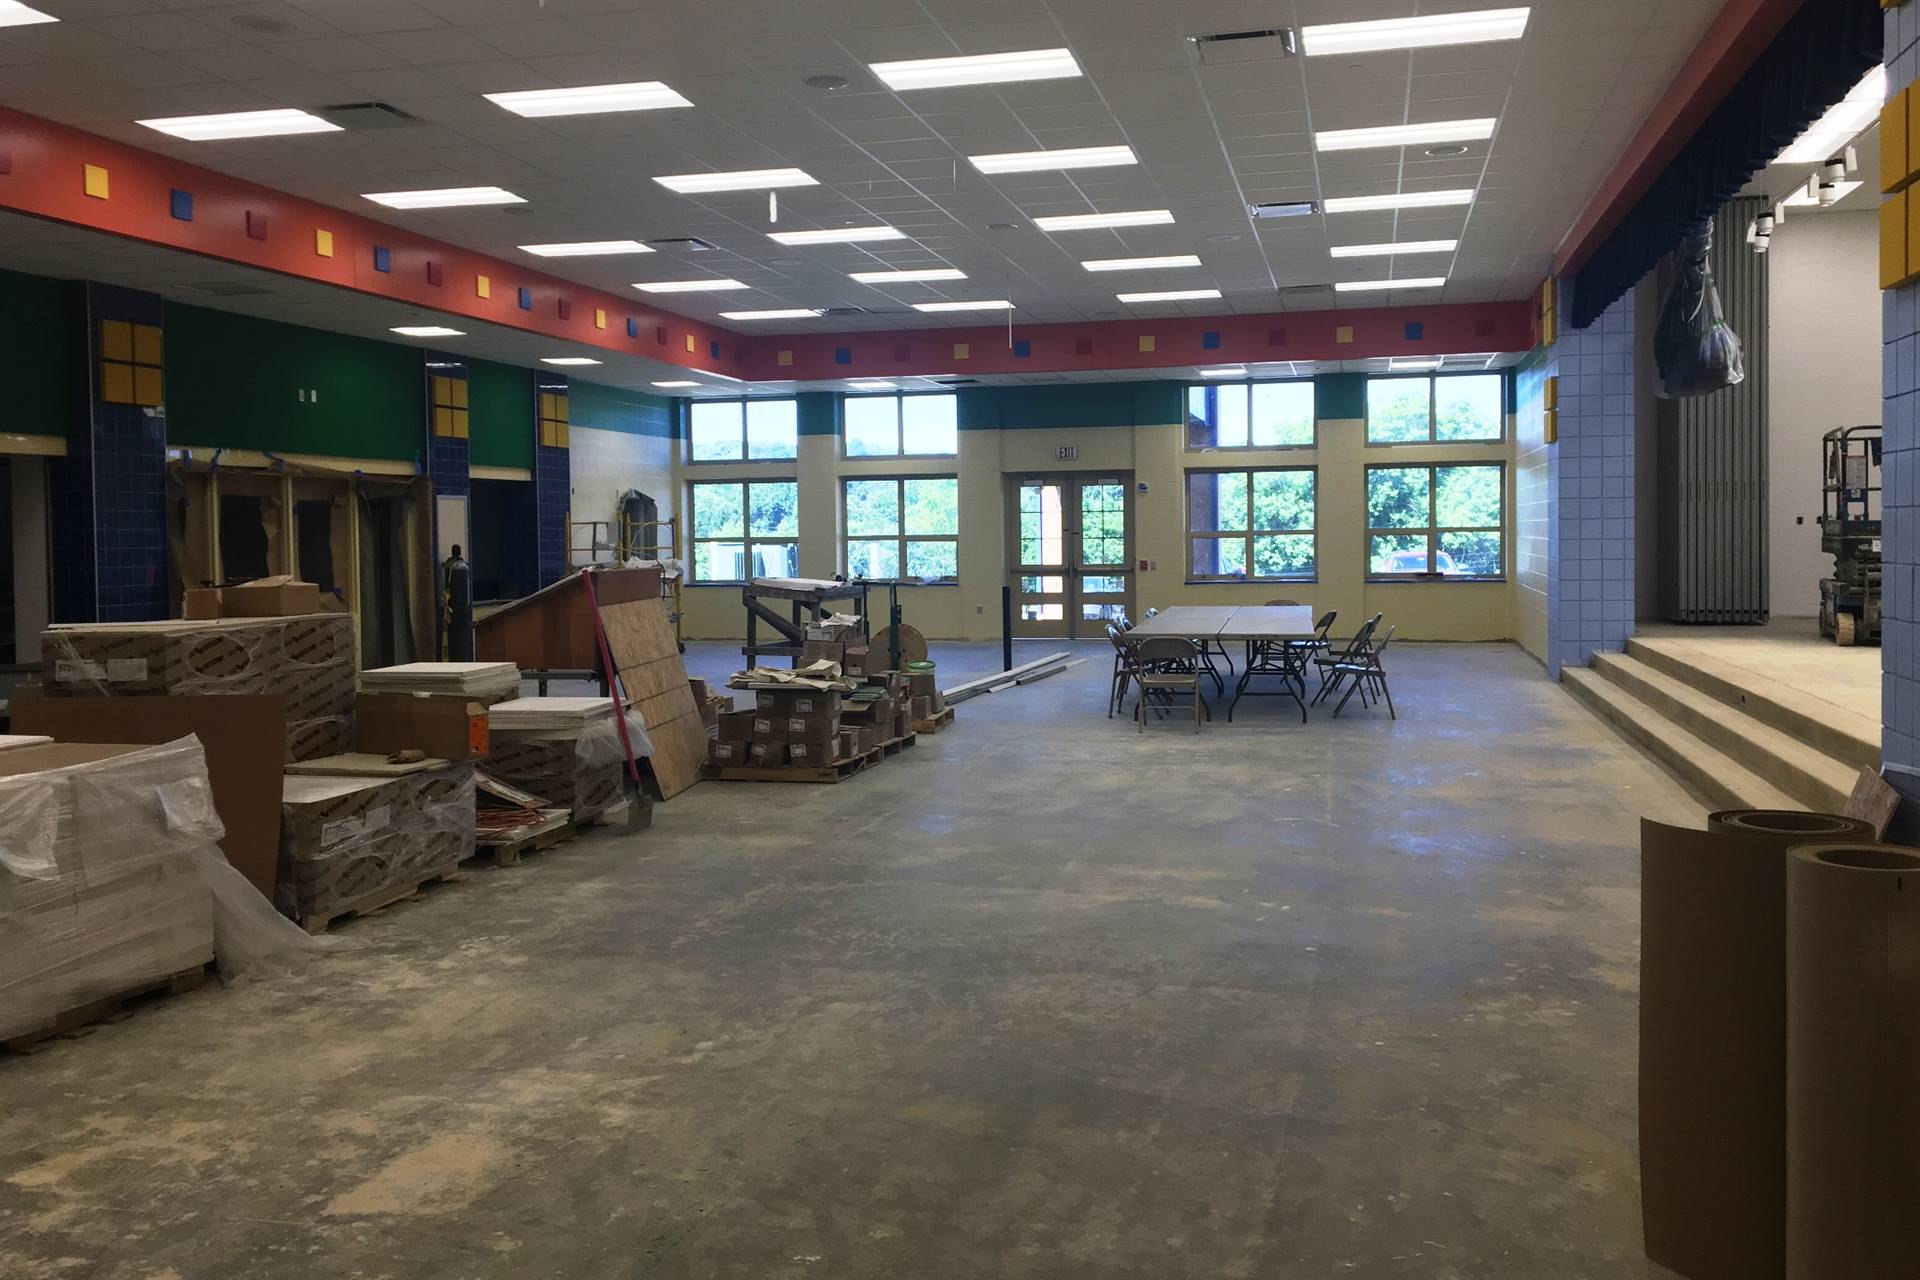 Scott Primary cafeteria with boxes